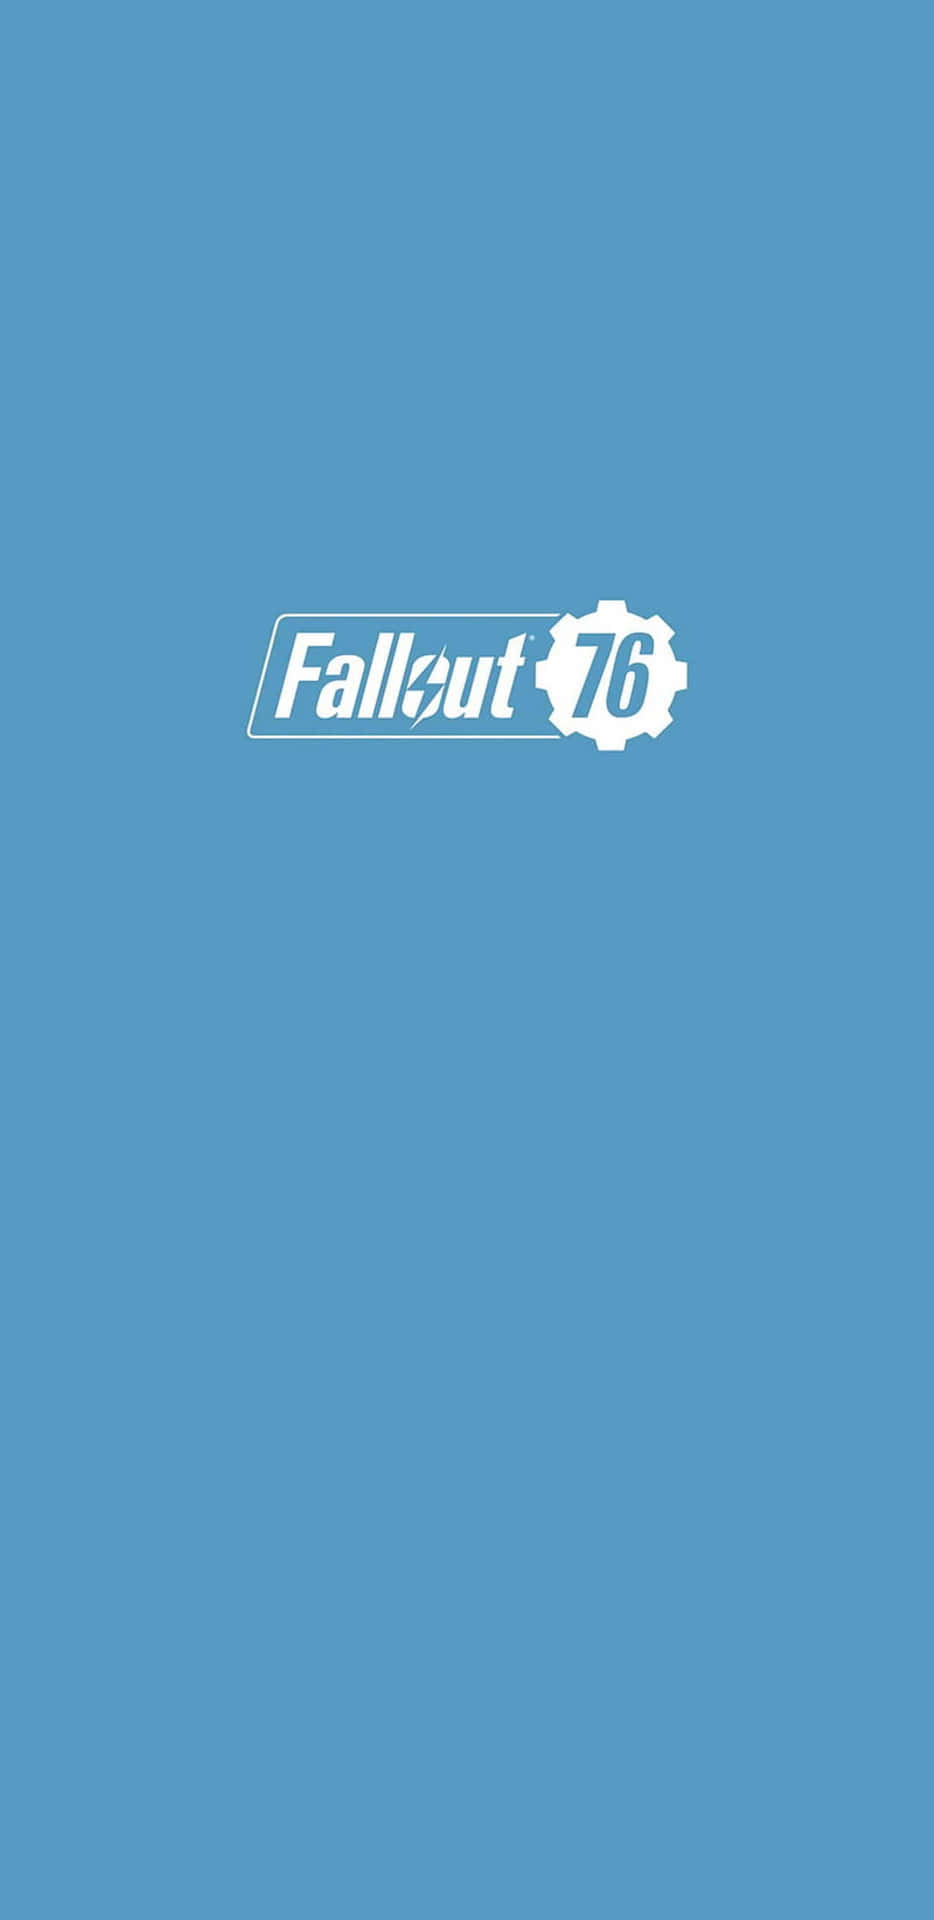 Play Fallout 76 on the new Pixel 3XL